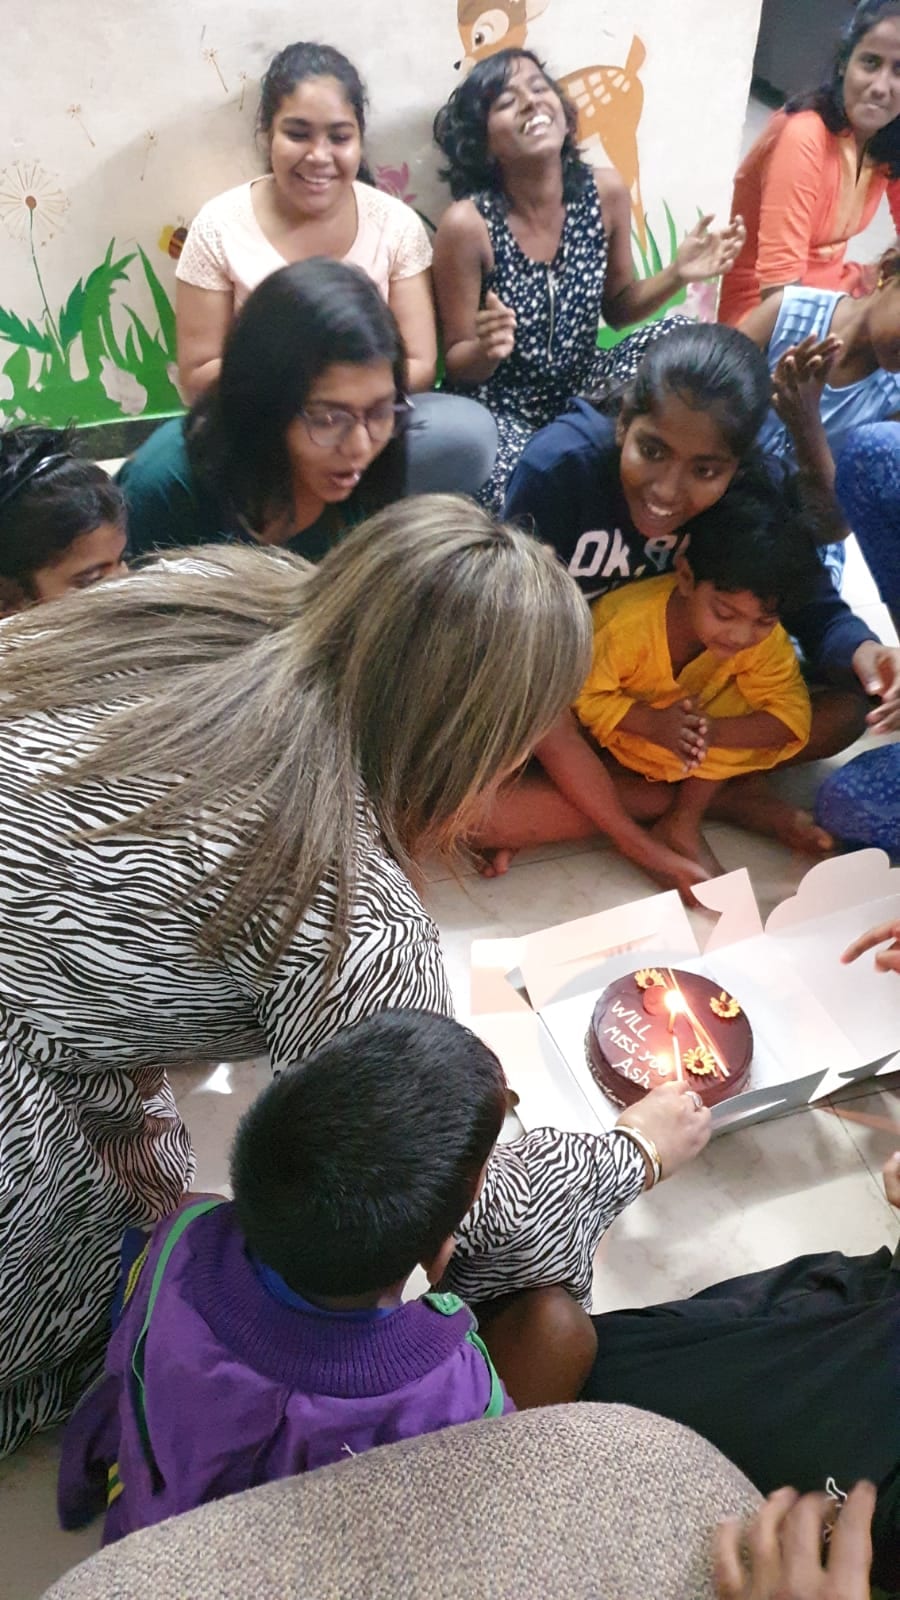 2RaysHope Guides NGOs In India On Ways To Build A Brighter Future For Children